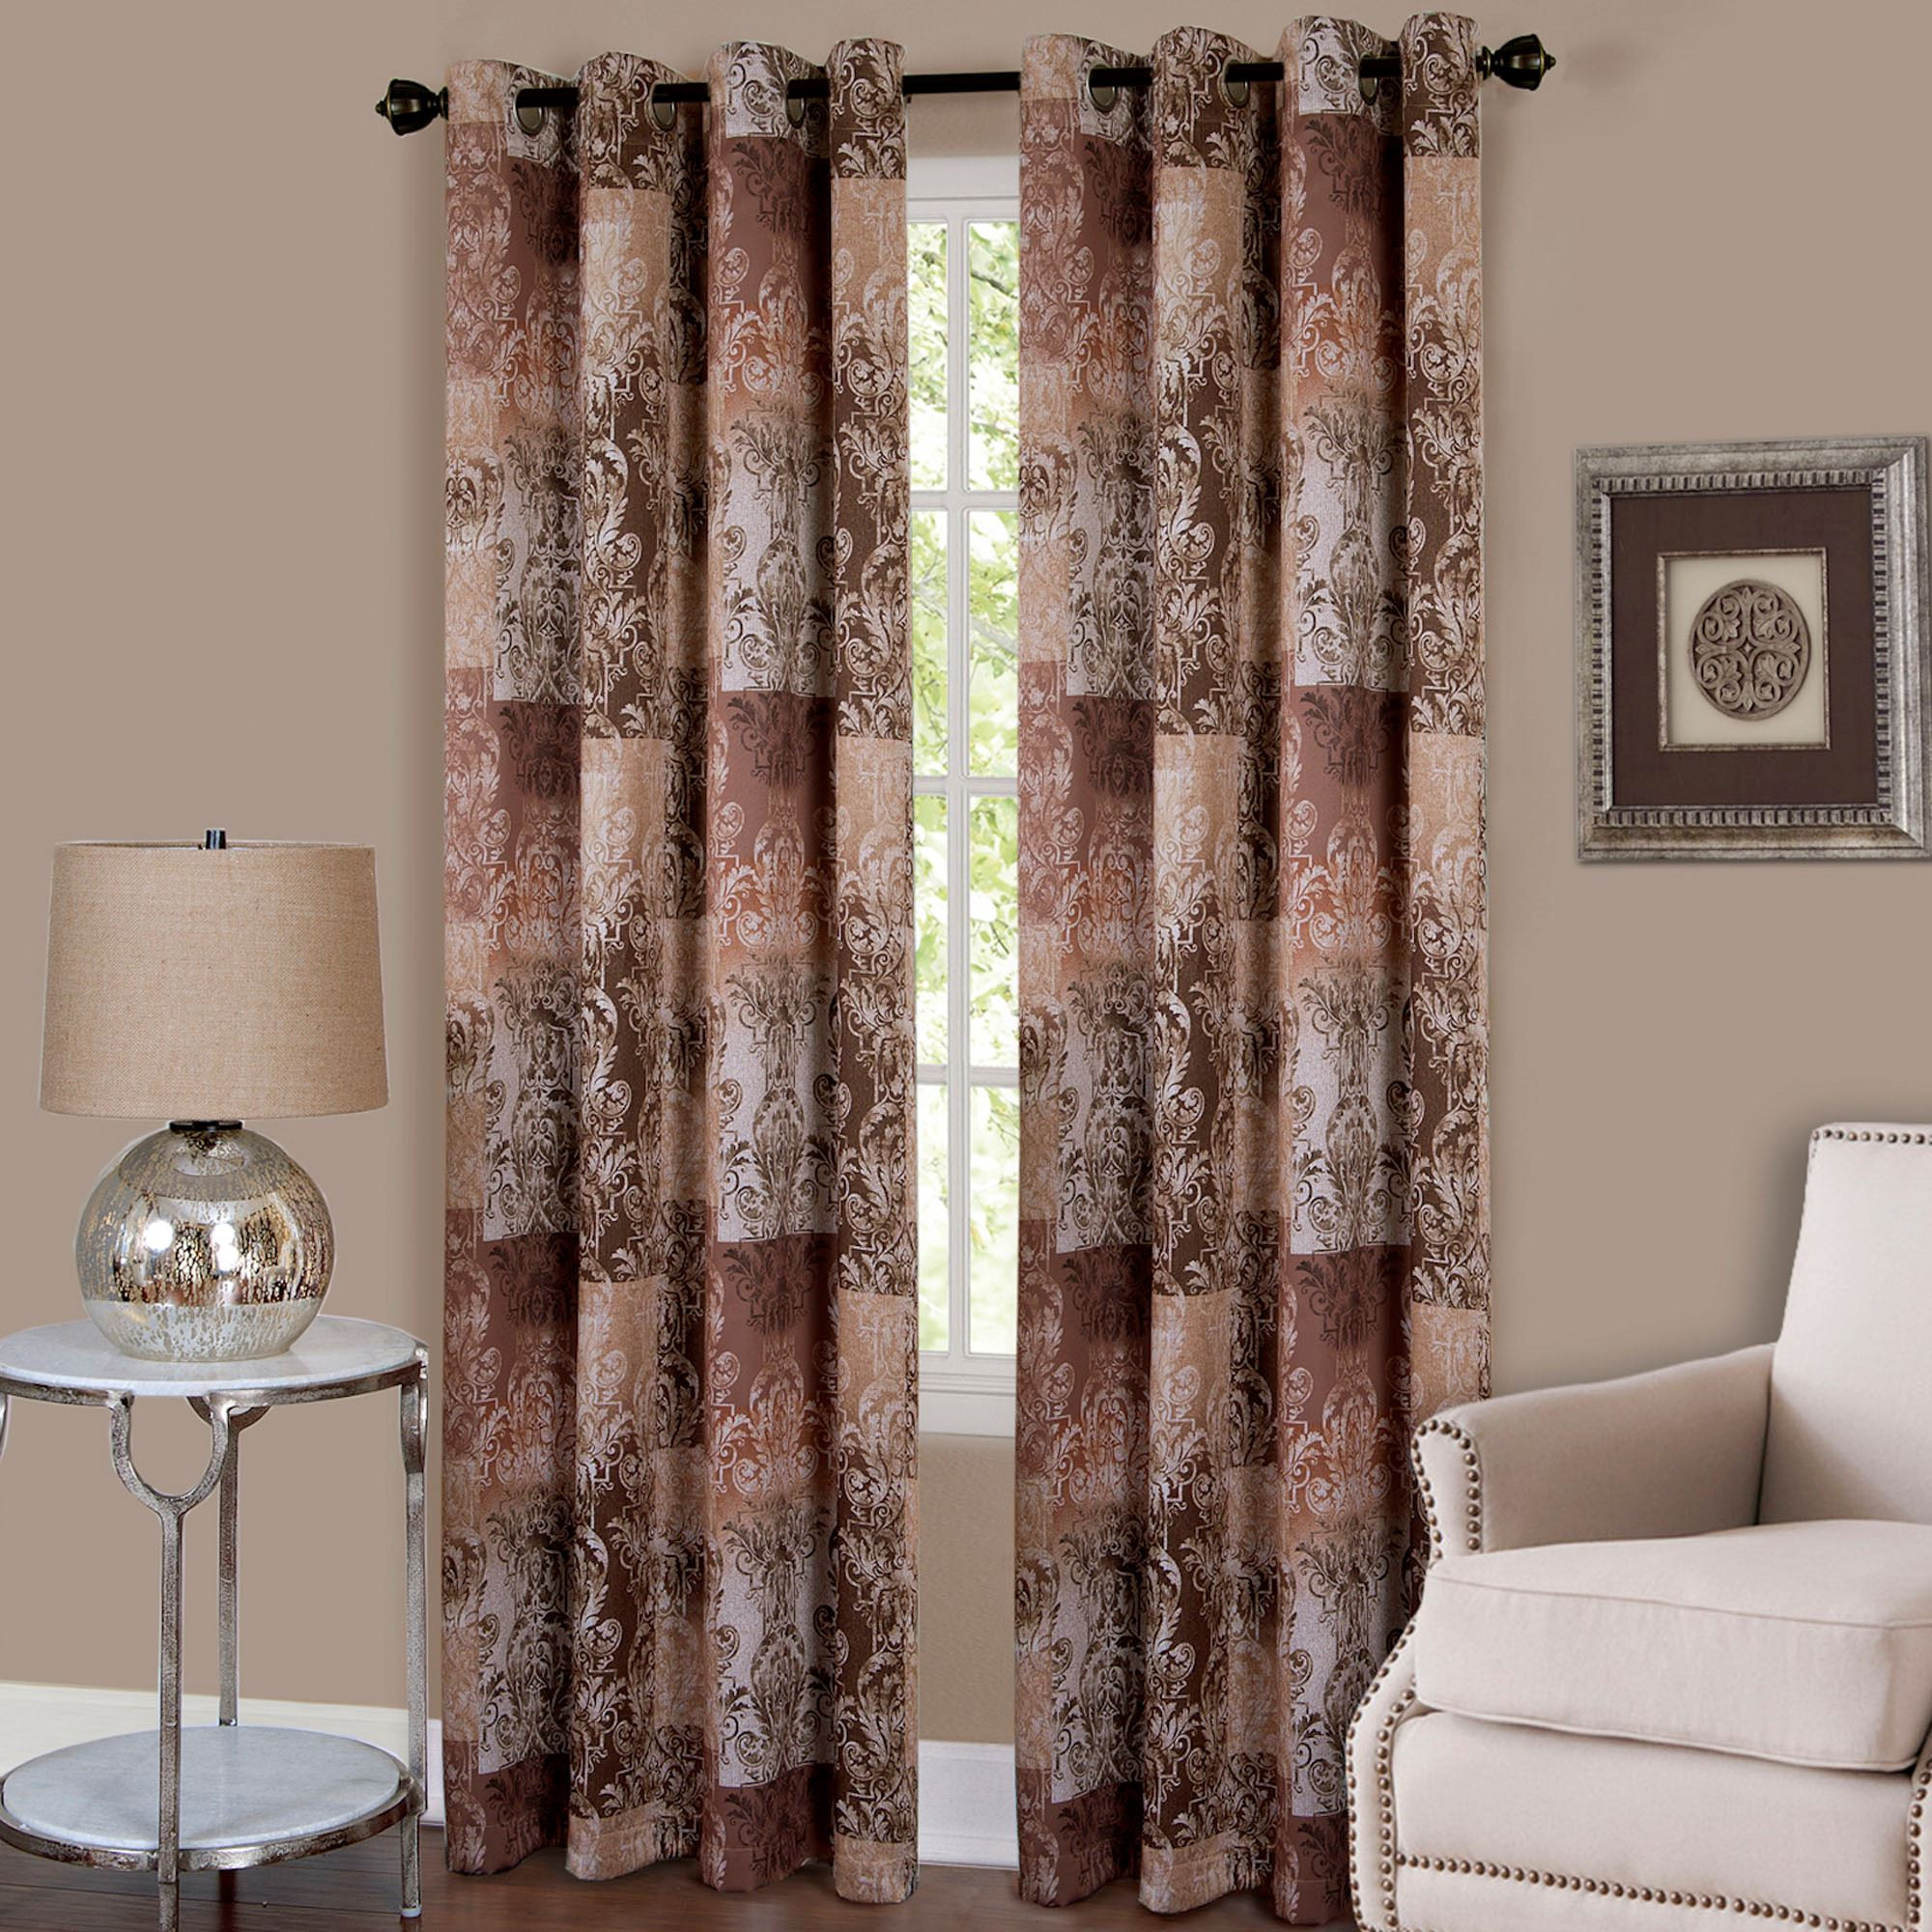 Jc Penneys Kitchen Curtains
 Curtain Enchanting Jcpenney Valances Curtains For Window